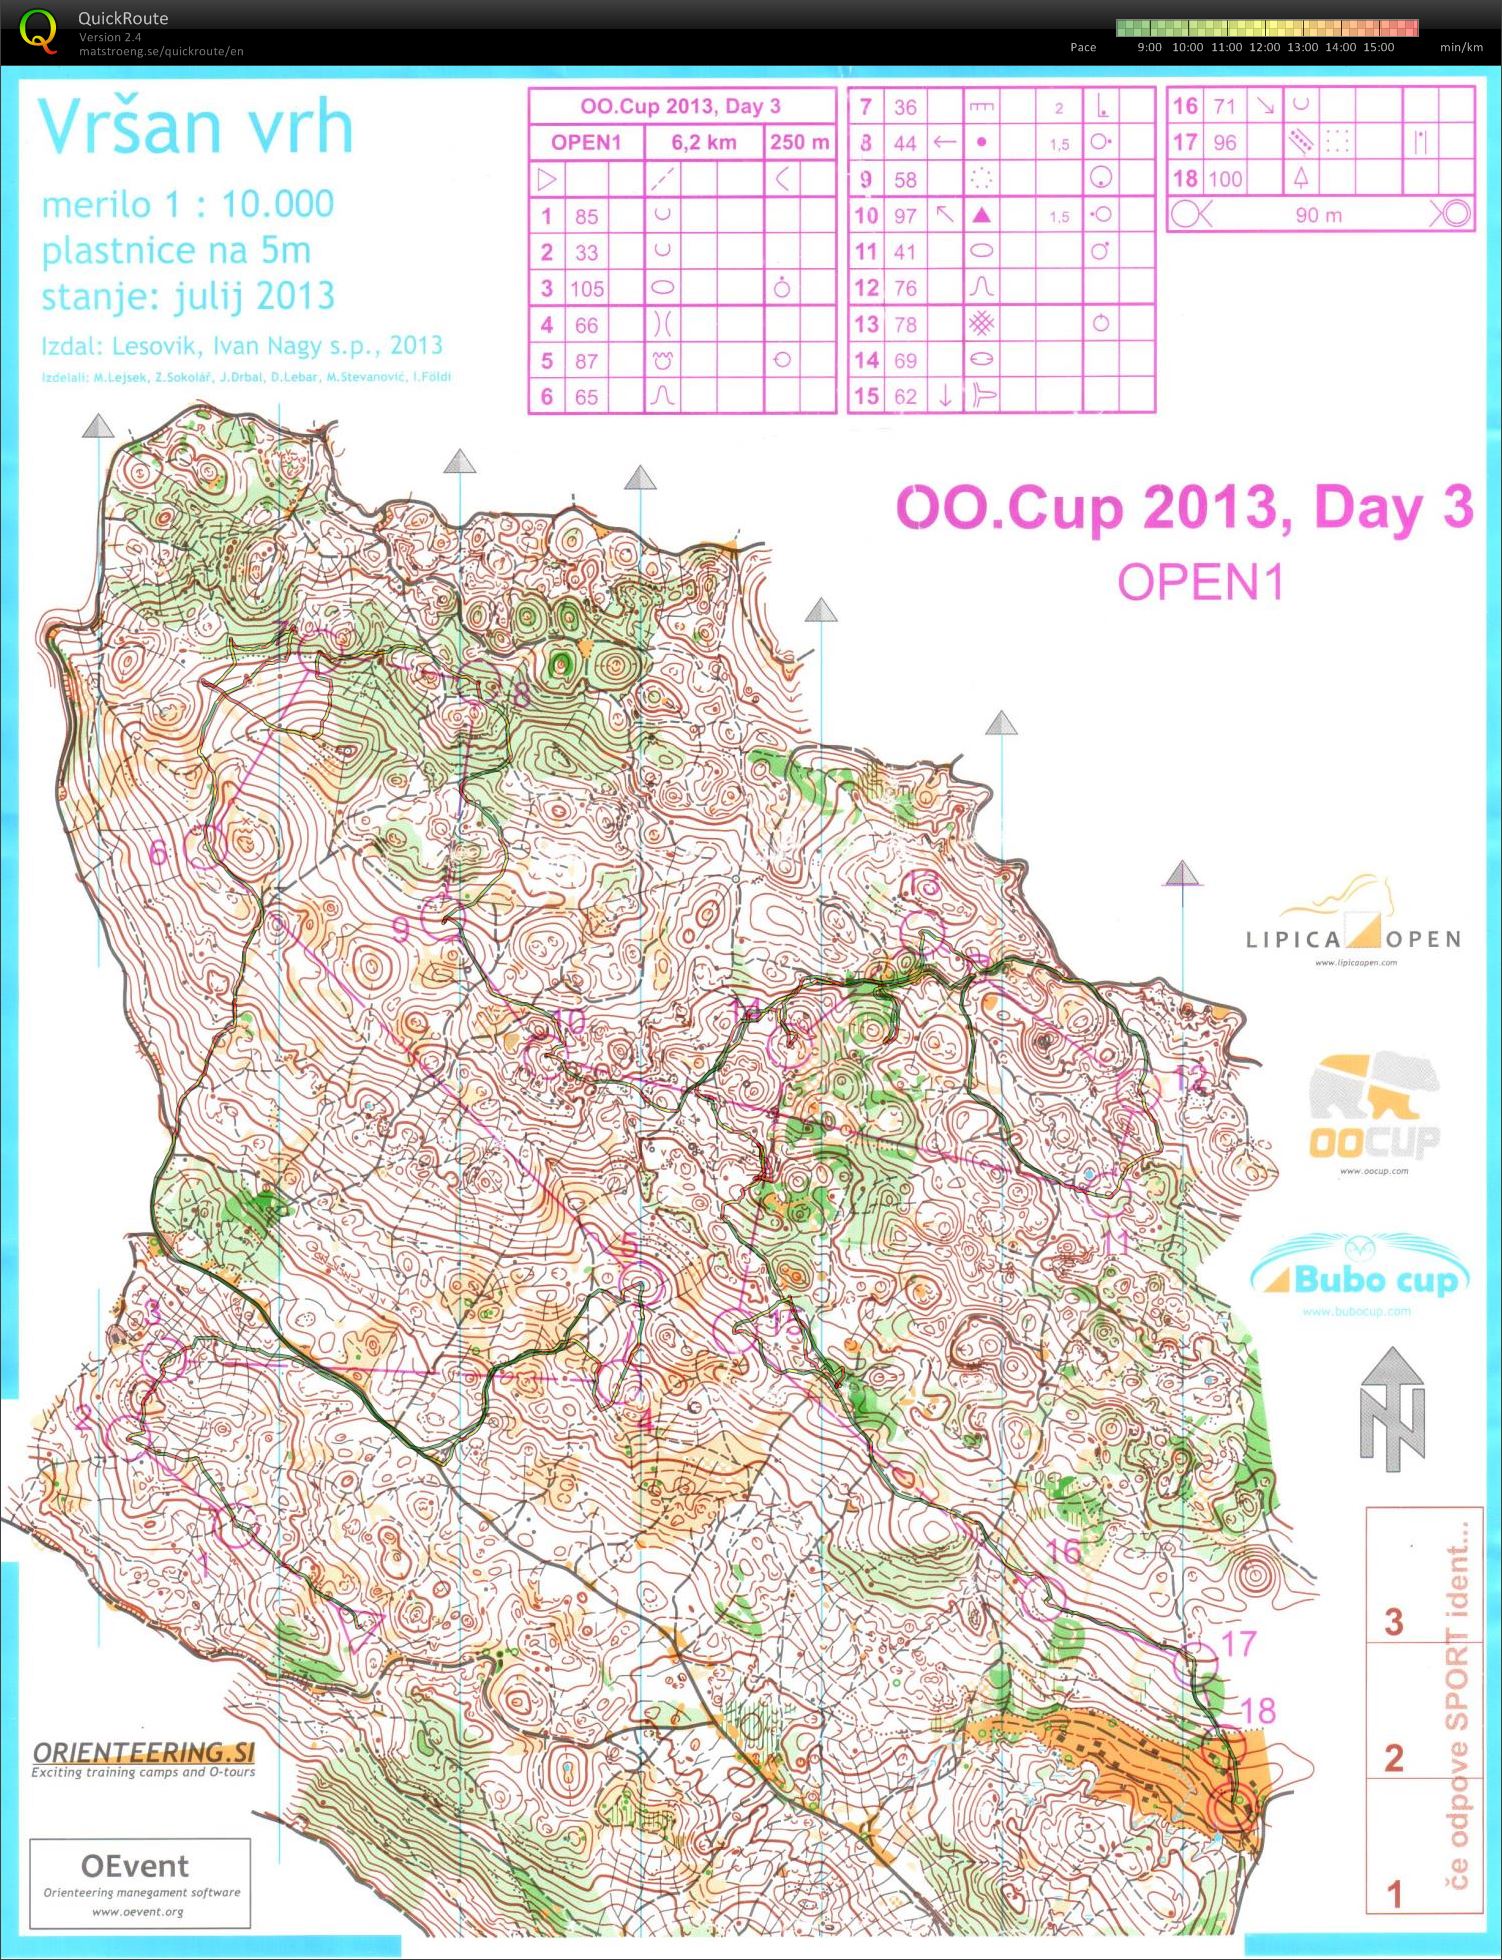 OOCup stage 3. (28.07.2013)